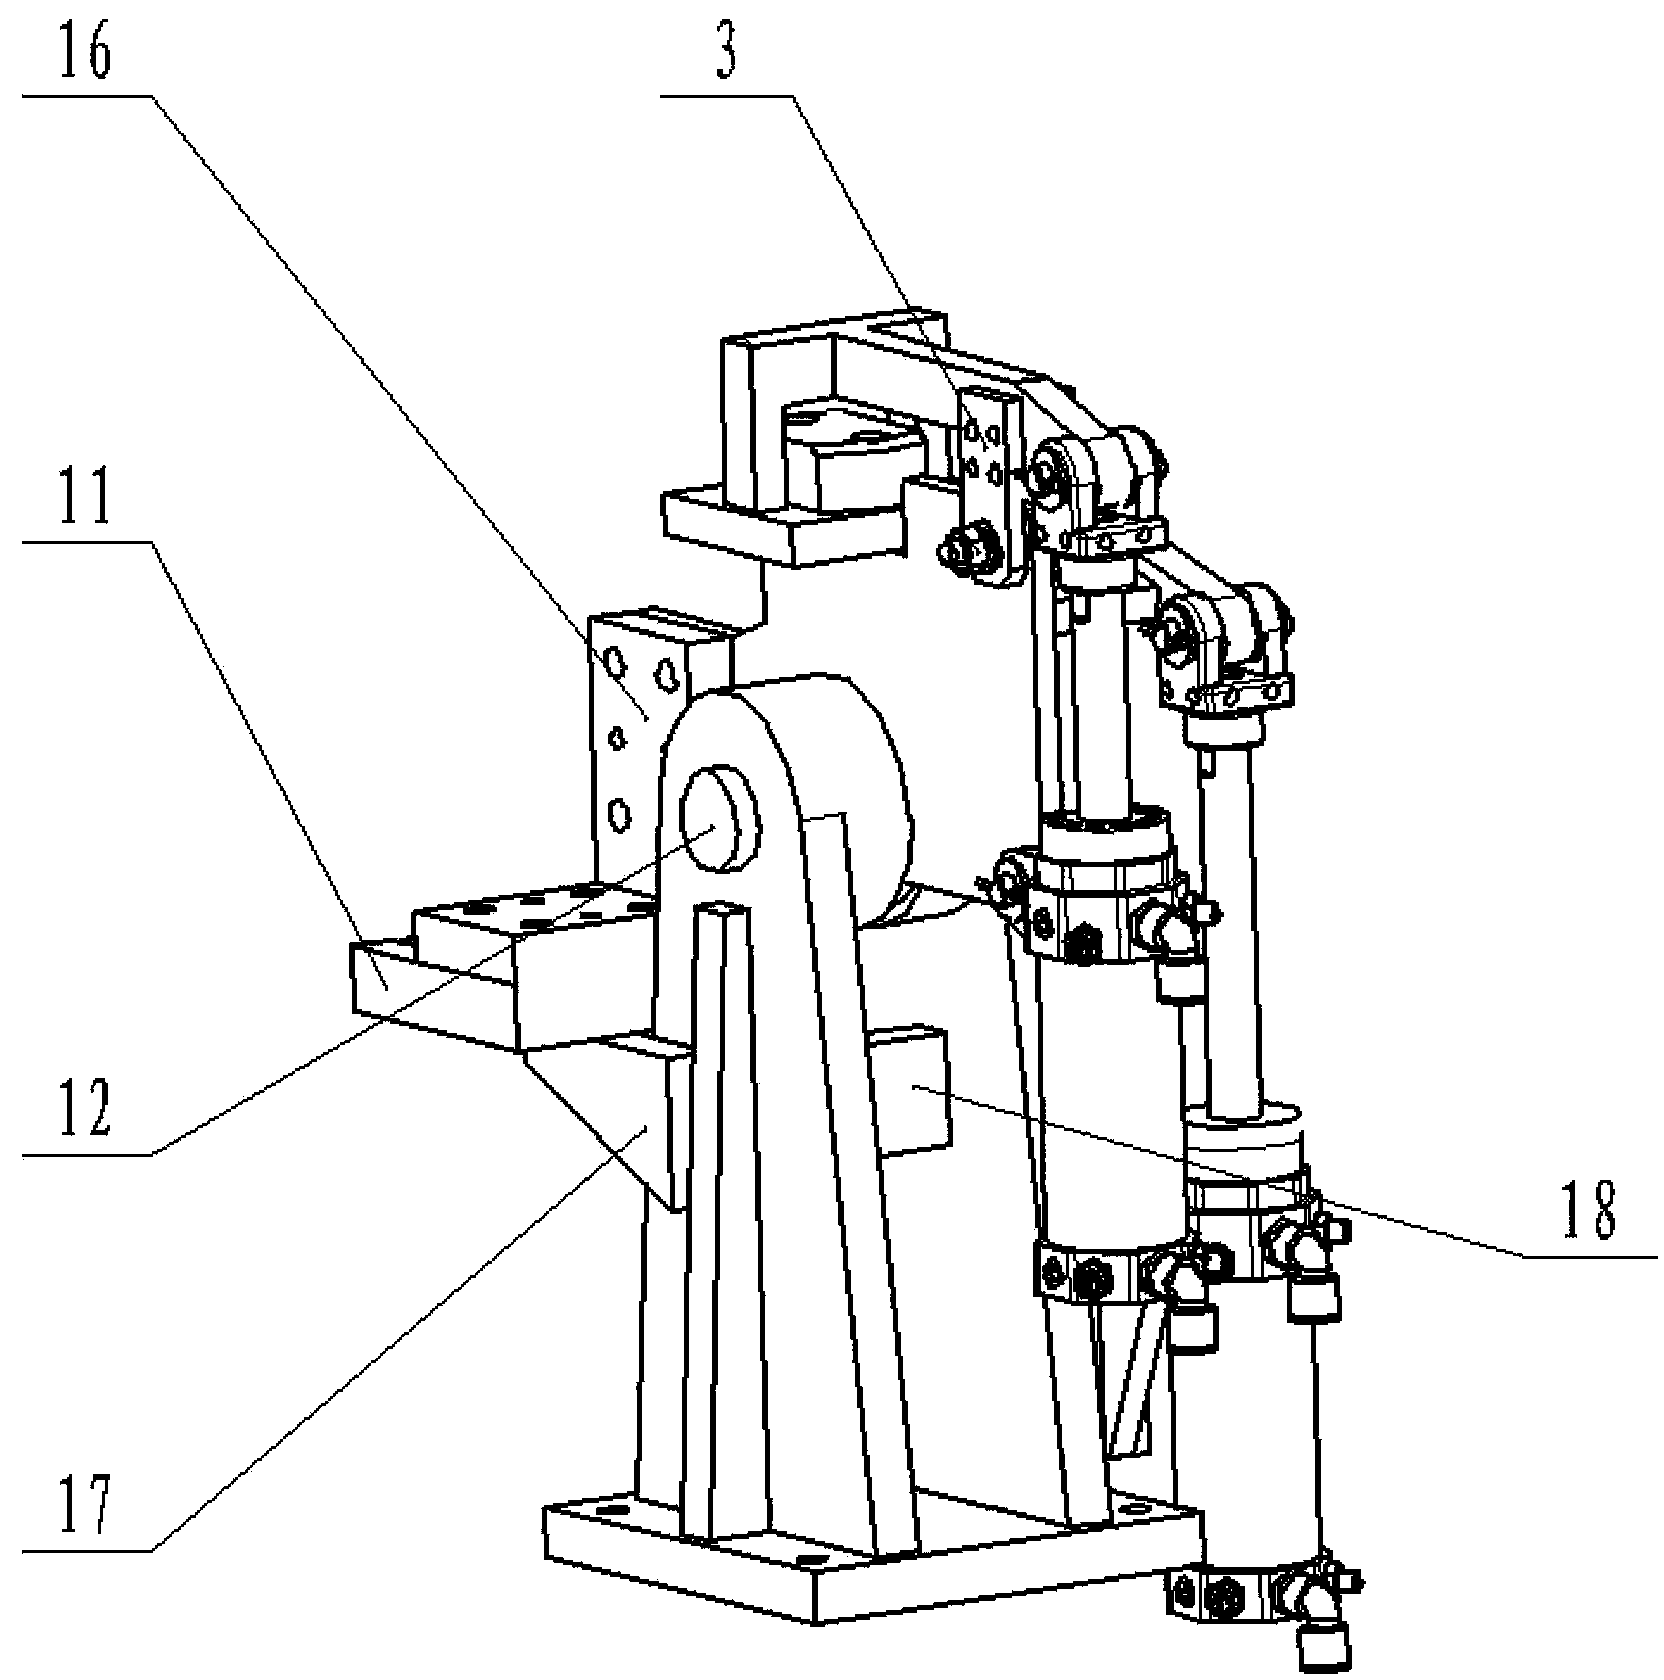 Welding tool for rear installation supporting base of truck body